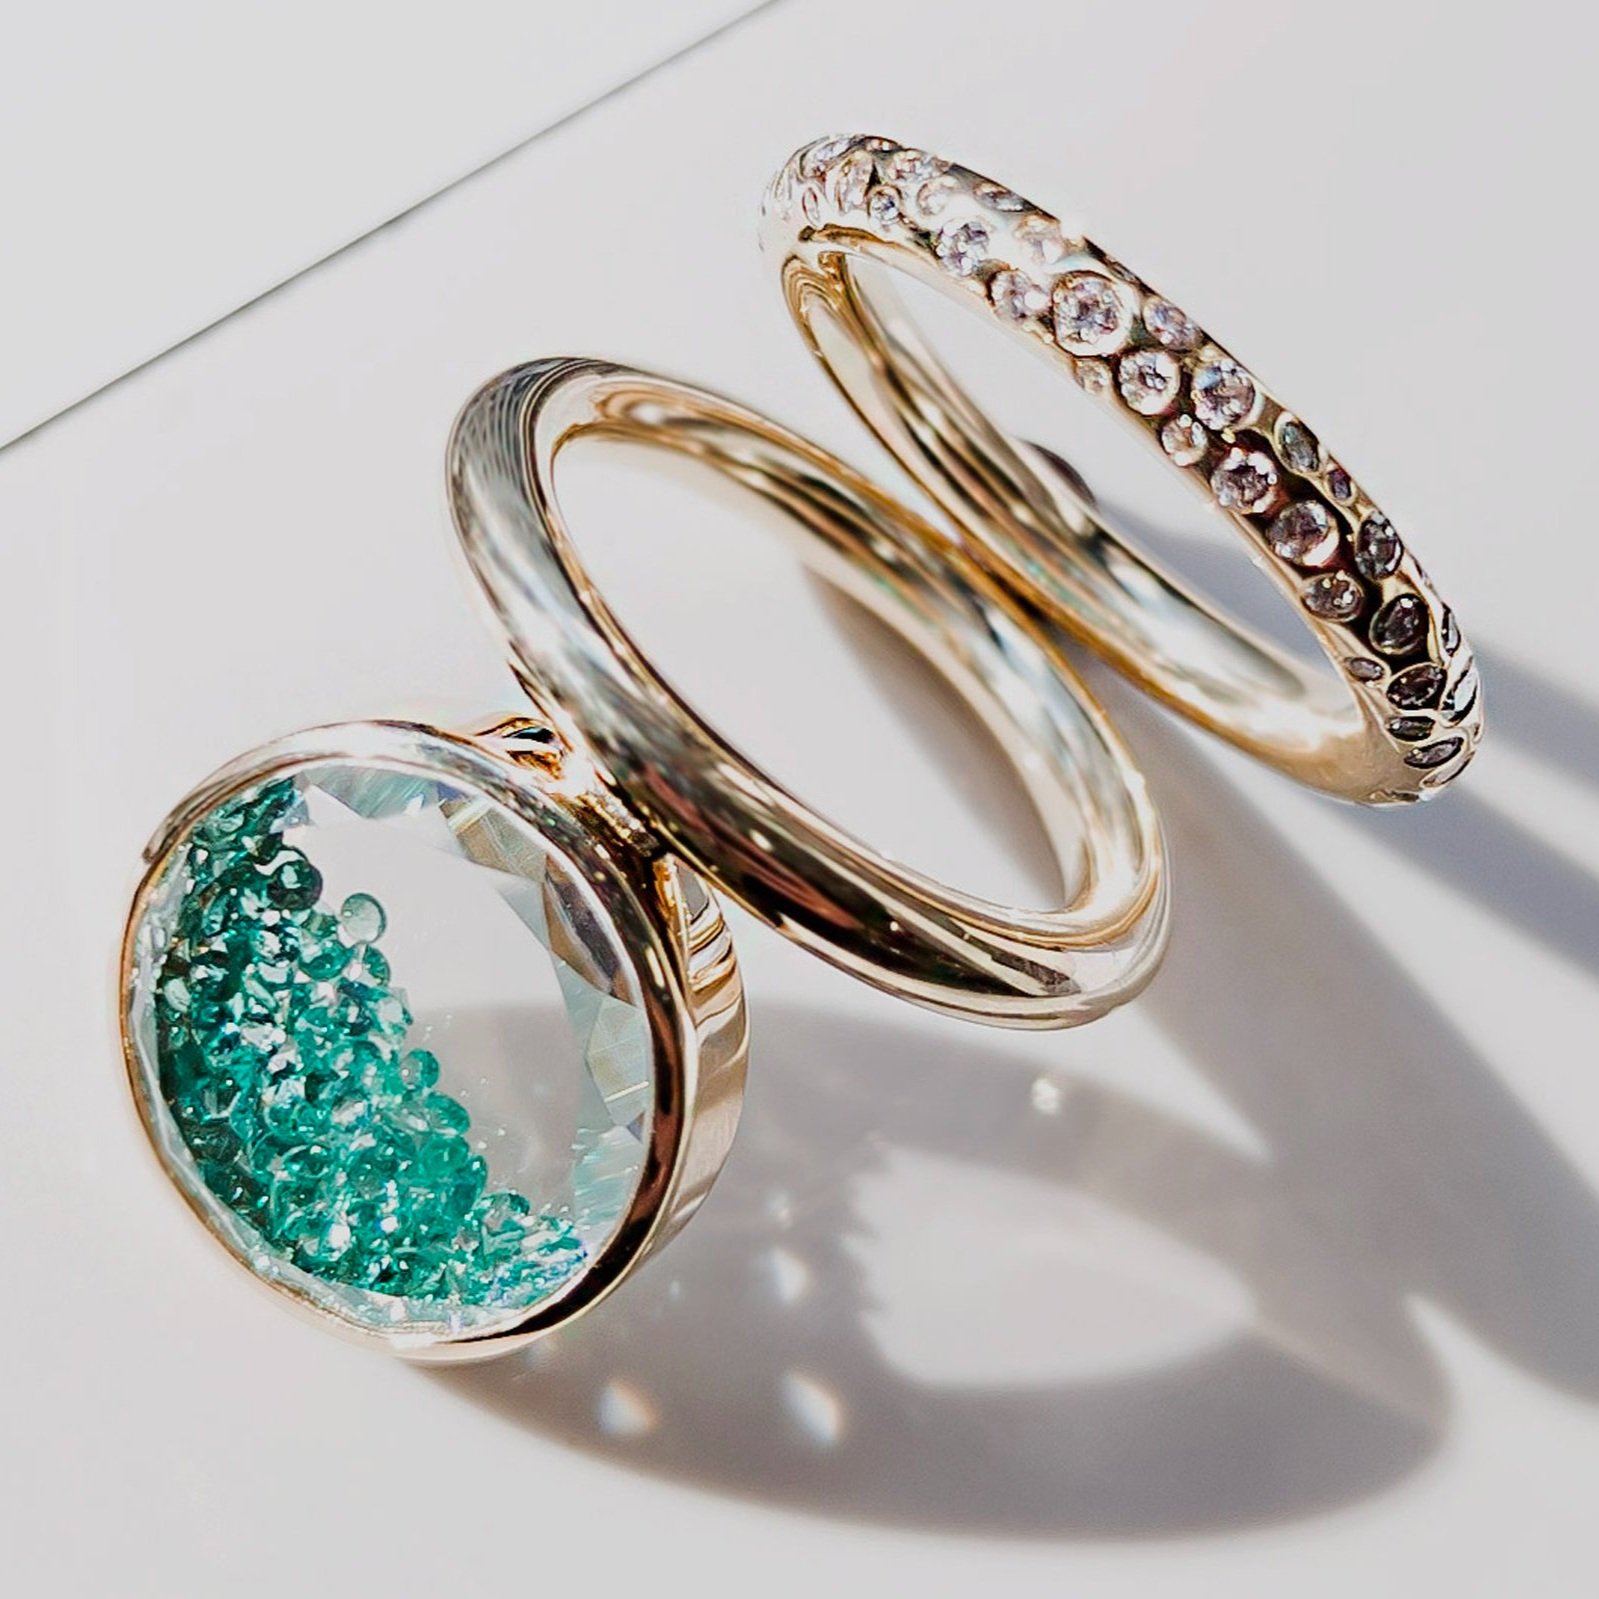 Moritz's newest collection featuring the Bambole Emerald Ring and the Circo Pavé Band